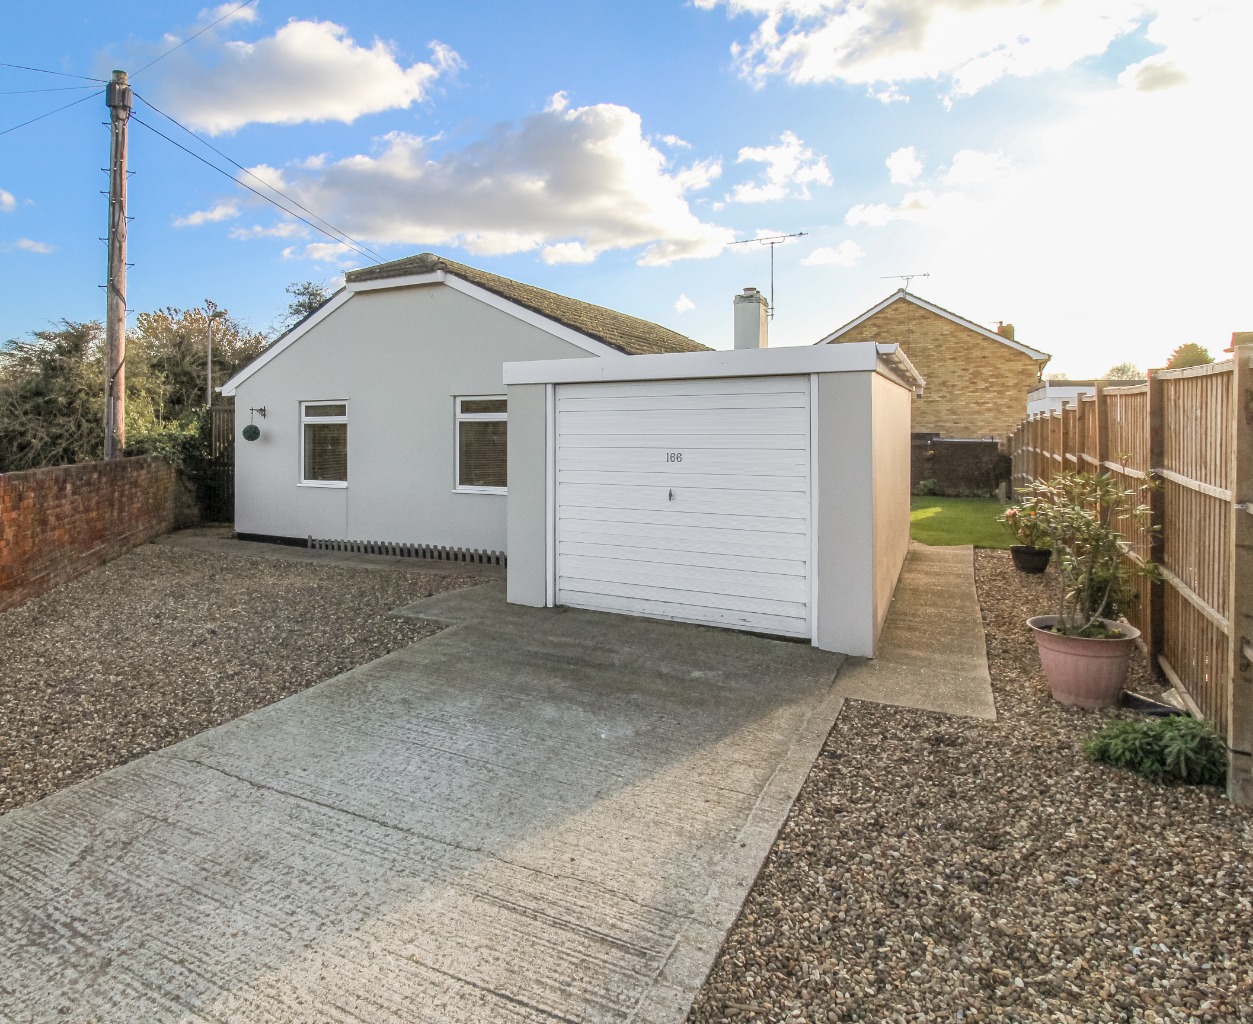 Driveway parking for three cars, garage to the side, three double bedrooms, south facing rear garden, detached bungalow, refitted kitchen and bathroom, excellent condition throughout, potential to ext (STPP), easy access to the M4, close to local amenities, rare opportunity